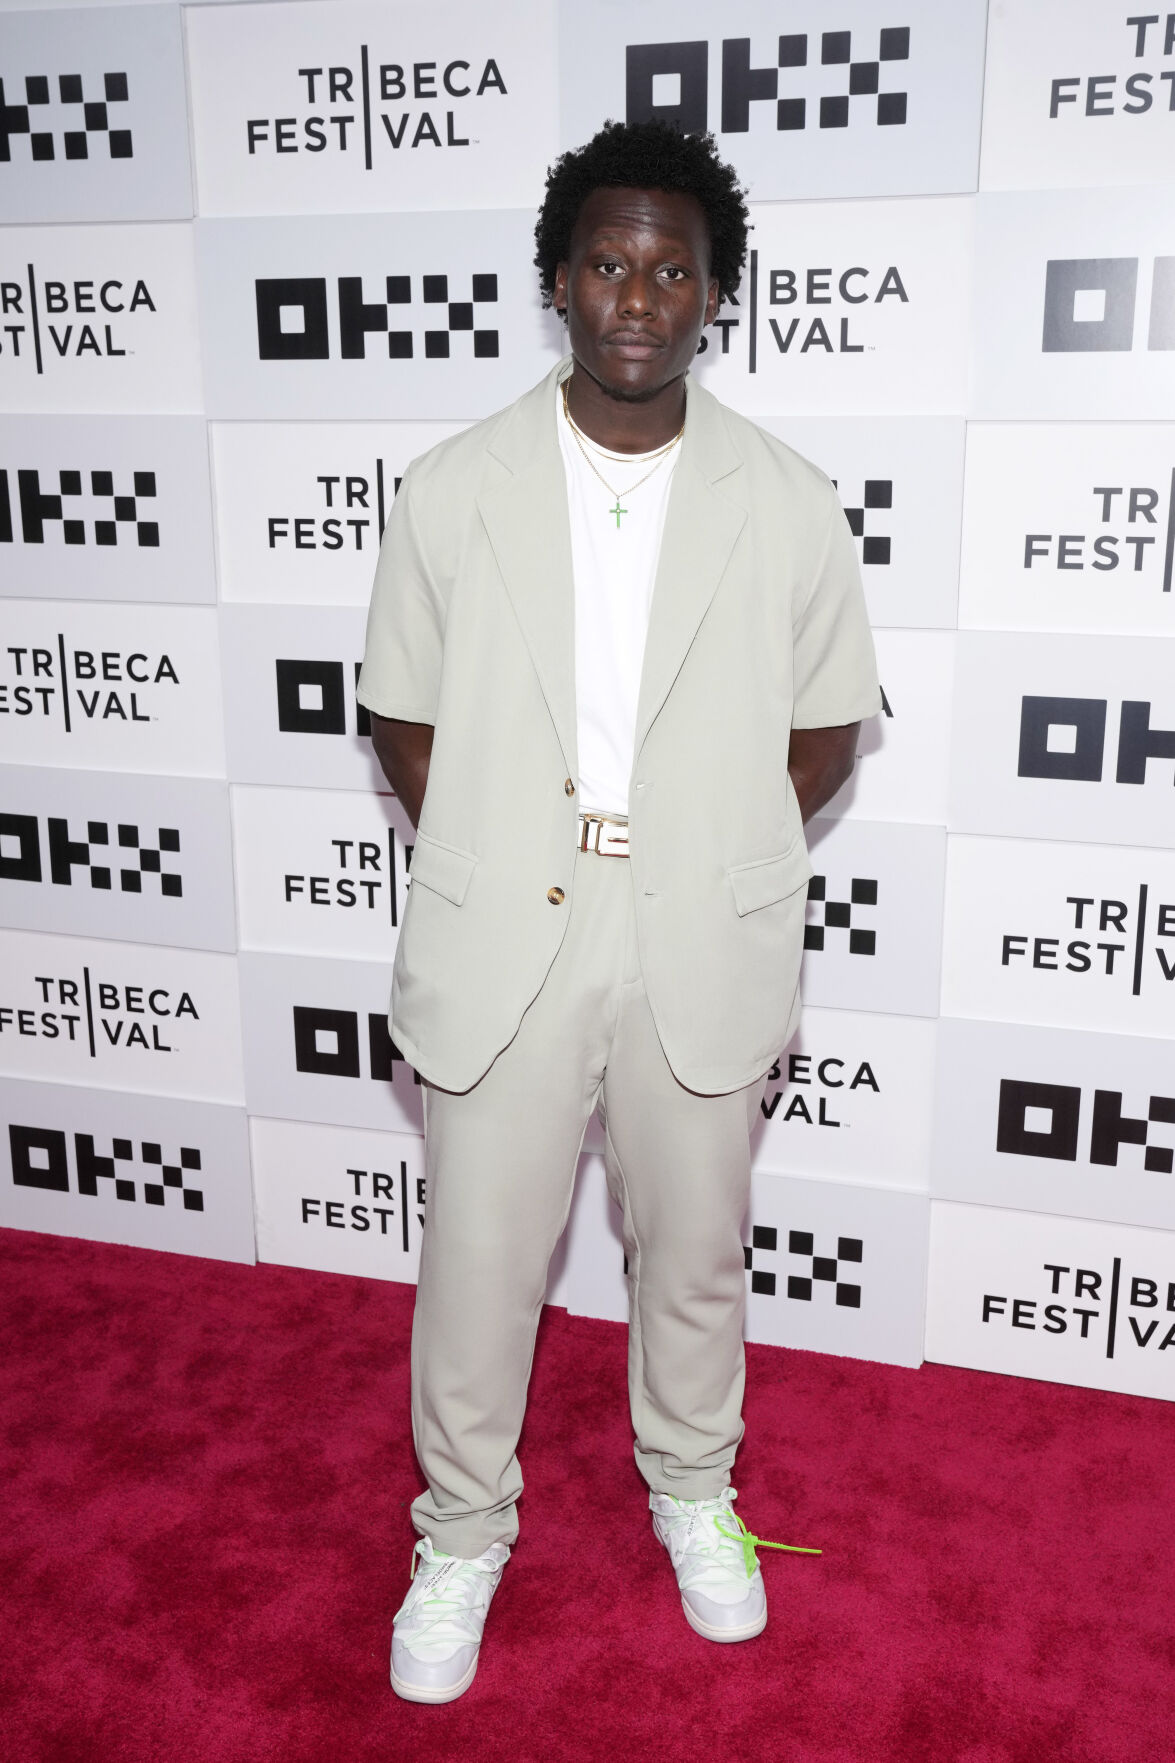 Okea Eme-Akwari attends the premiere of "The Walking Dead: Dead City" at the BMCC Tribeca Performing Arts Center during the Tribeca Festival on Tuesday, June 13, 2023, in New York.